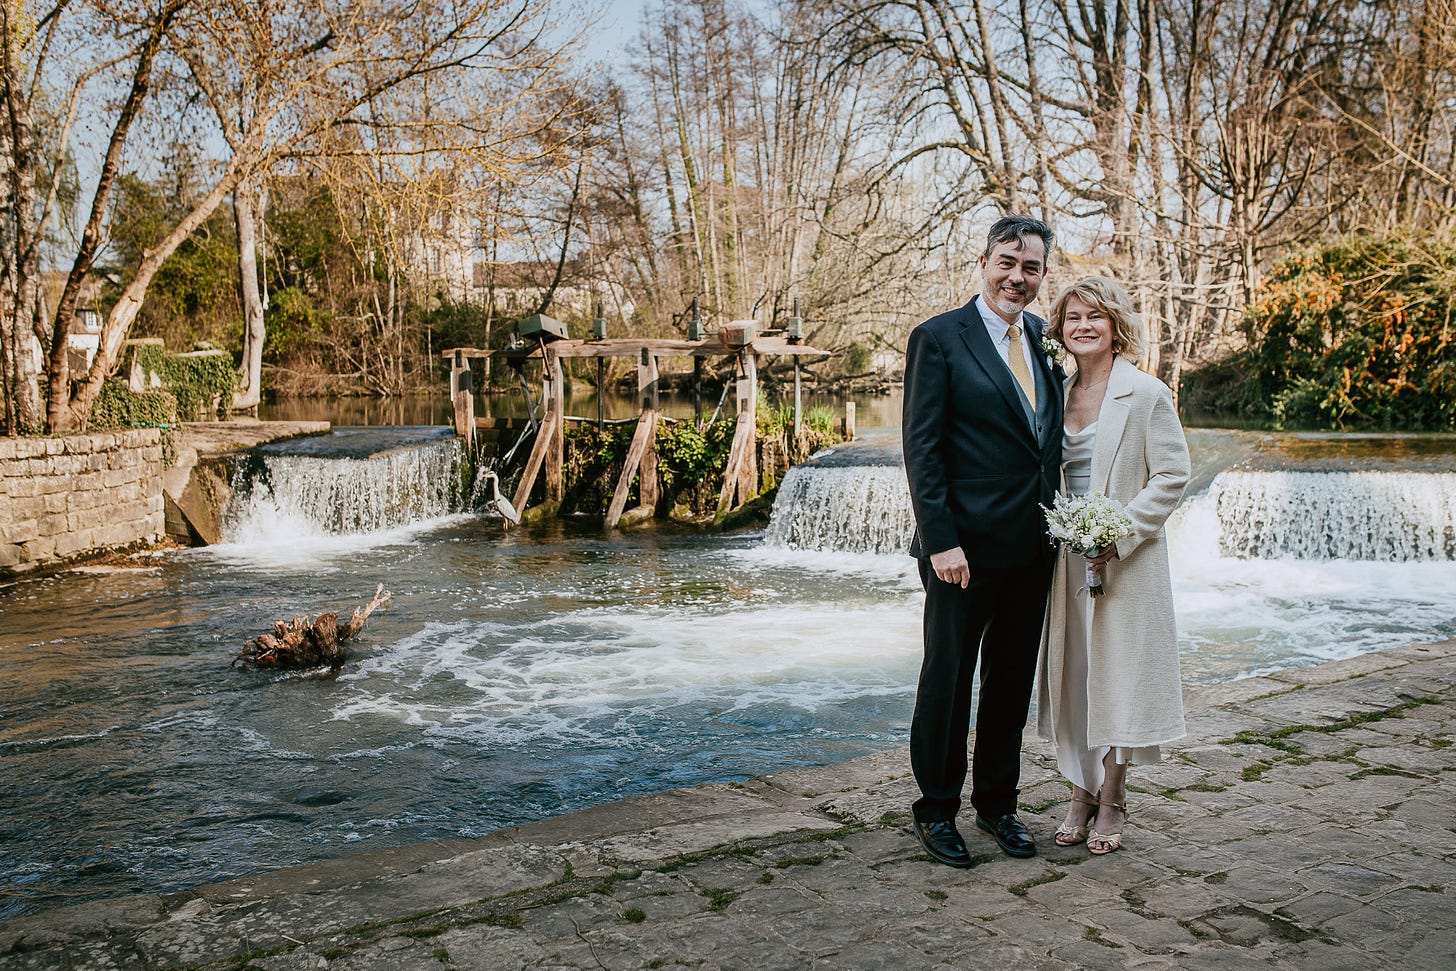 A man and a woman pose for wedding portraits in front of a waterfall in France